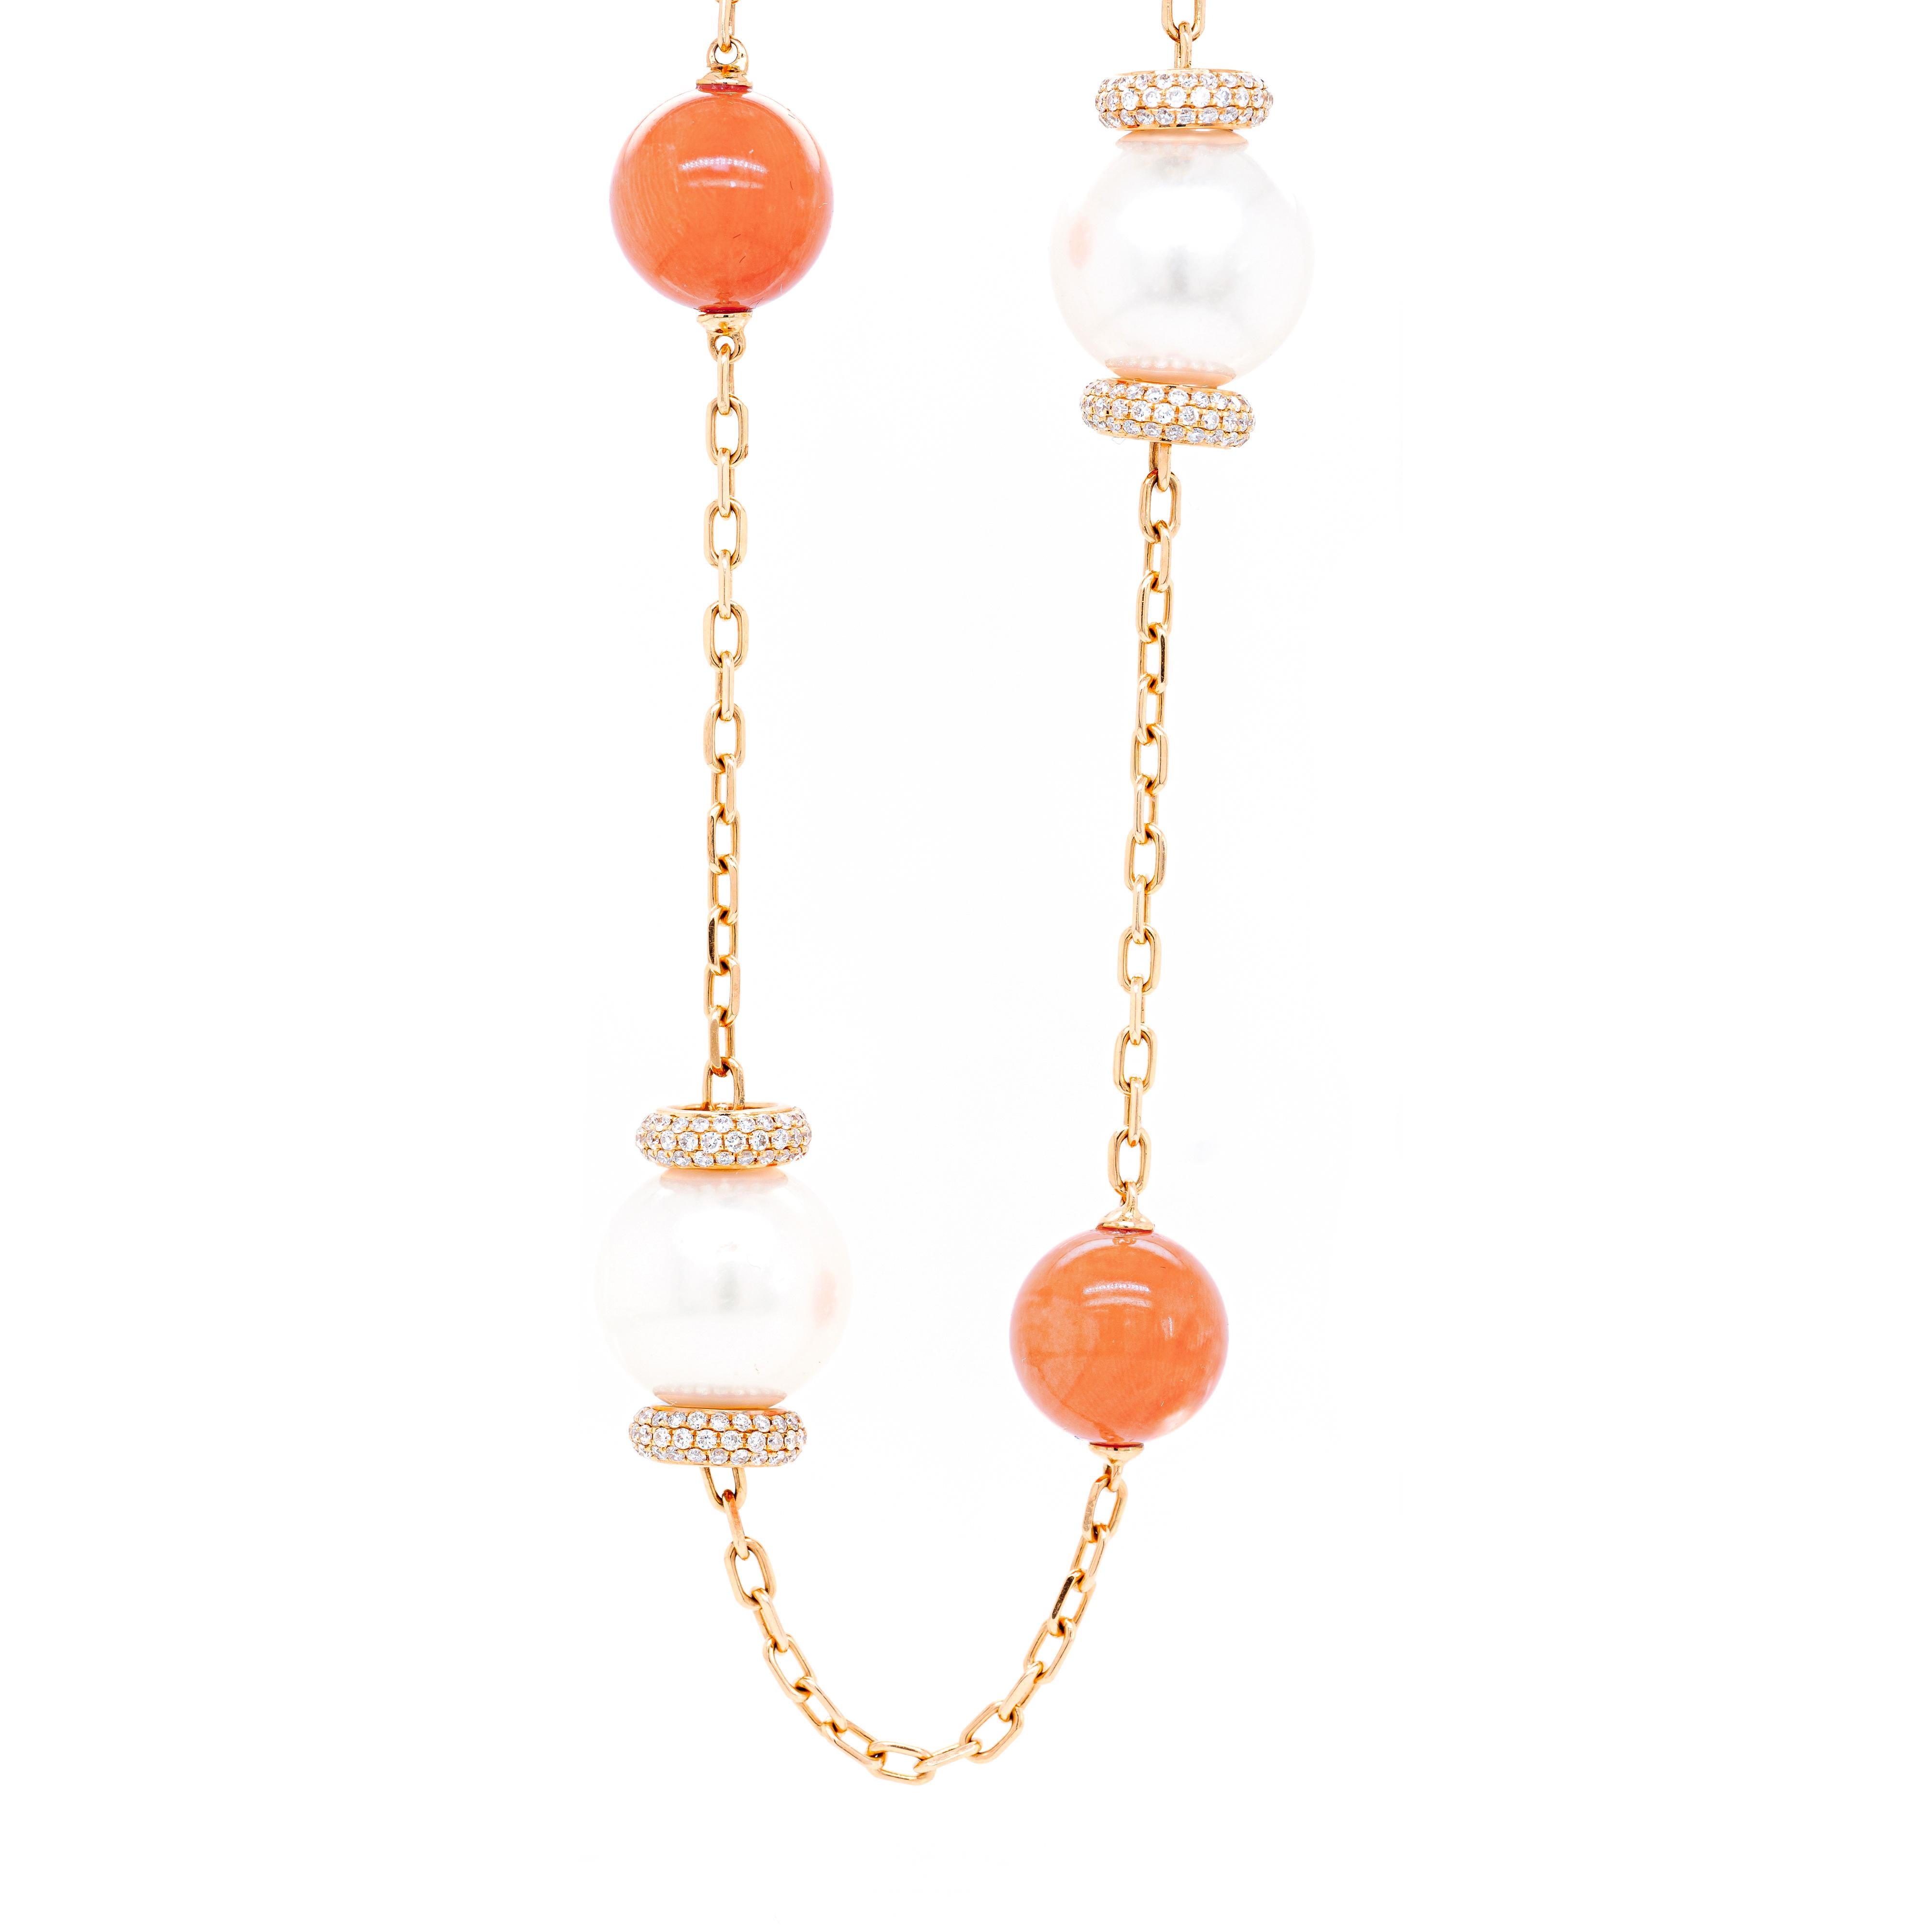 This long and elegant station necklace is beautifully designed with 9 round coral beads measuring 10.5mm, alternating with 10 cultured South Sea pearls measuring between 12.2-12.8mm, all spaced along a delicate 18 carat rose gold cable chain. Each